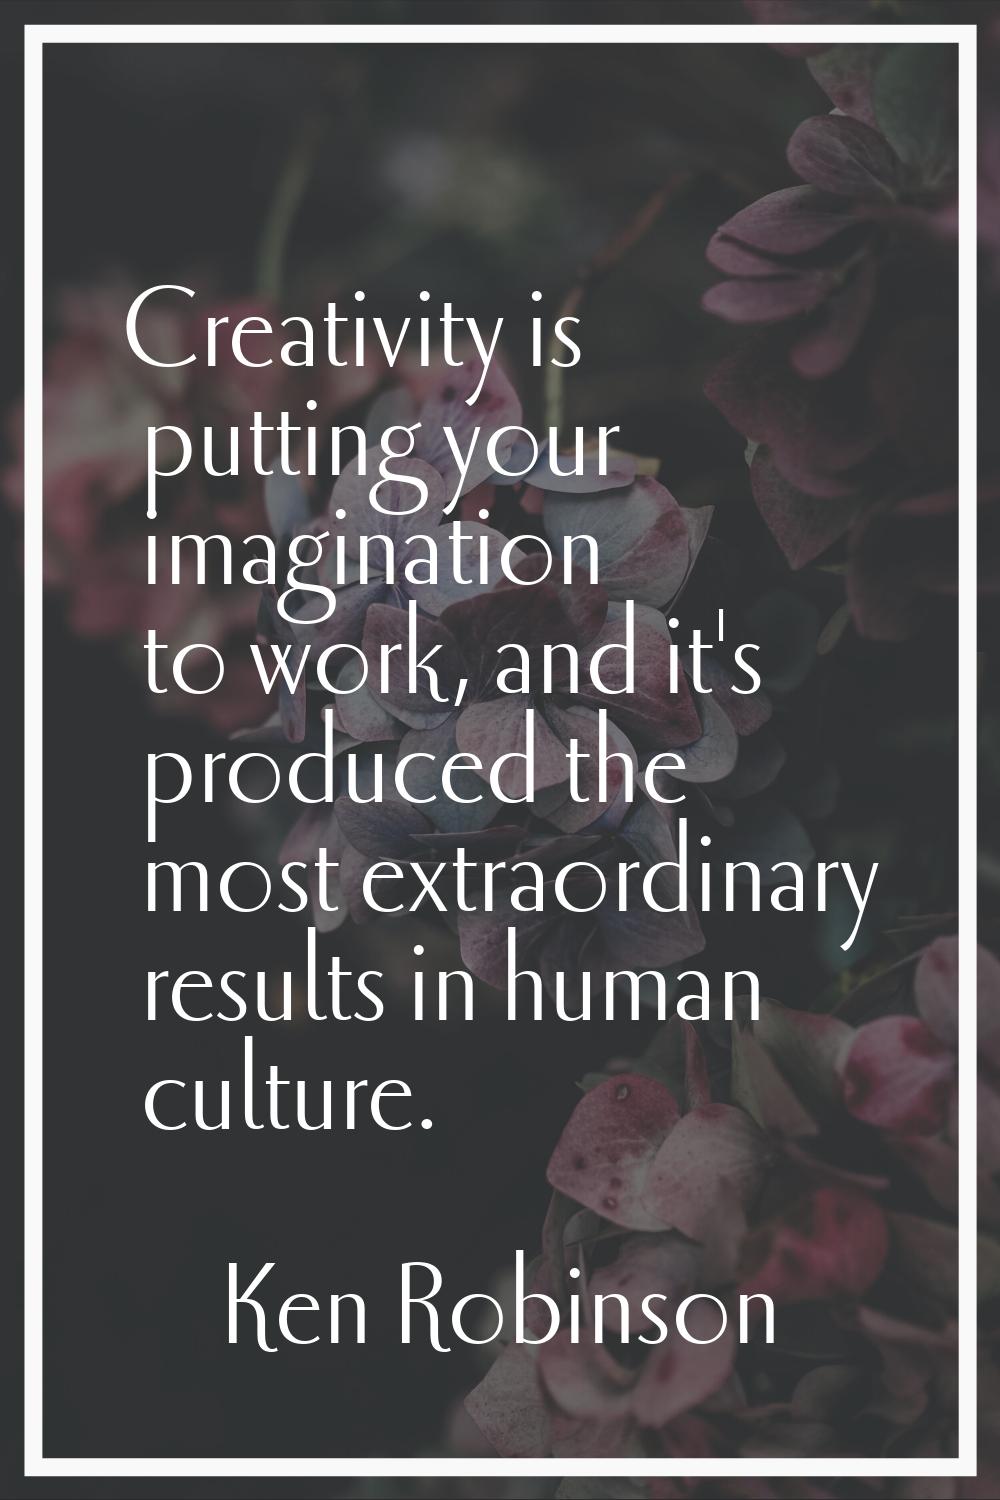 Creativity is putting your imagination to work, and it's produced the most extraordinary results in